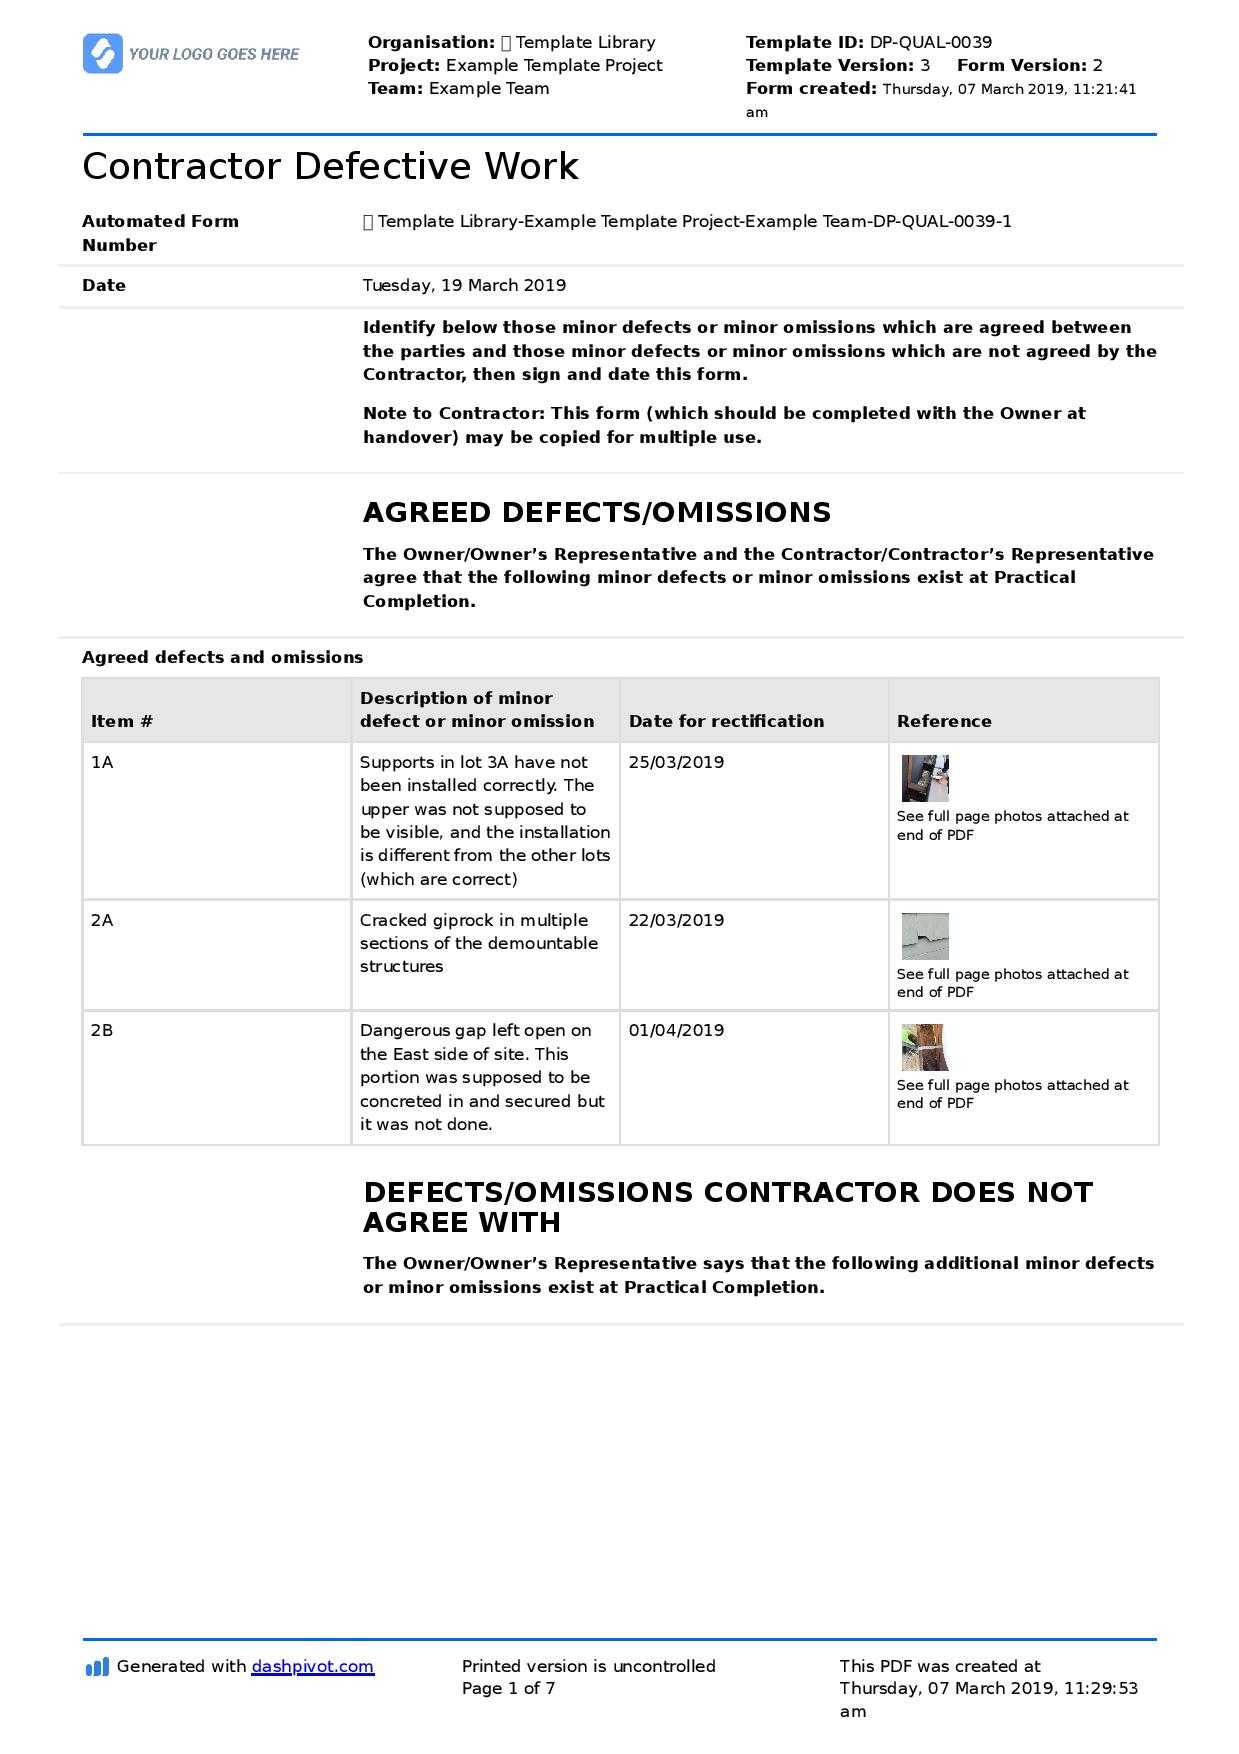 Letter To Contractor For Defective Work: Sample Letter And Intended For Construction Deficiency Report Template